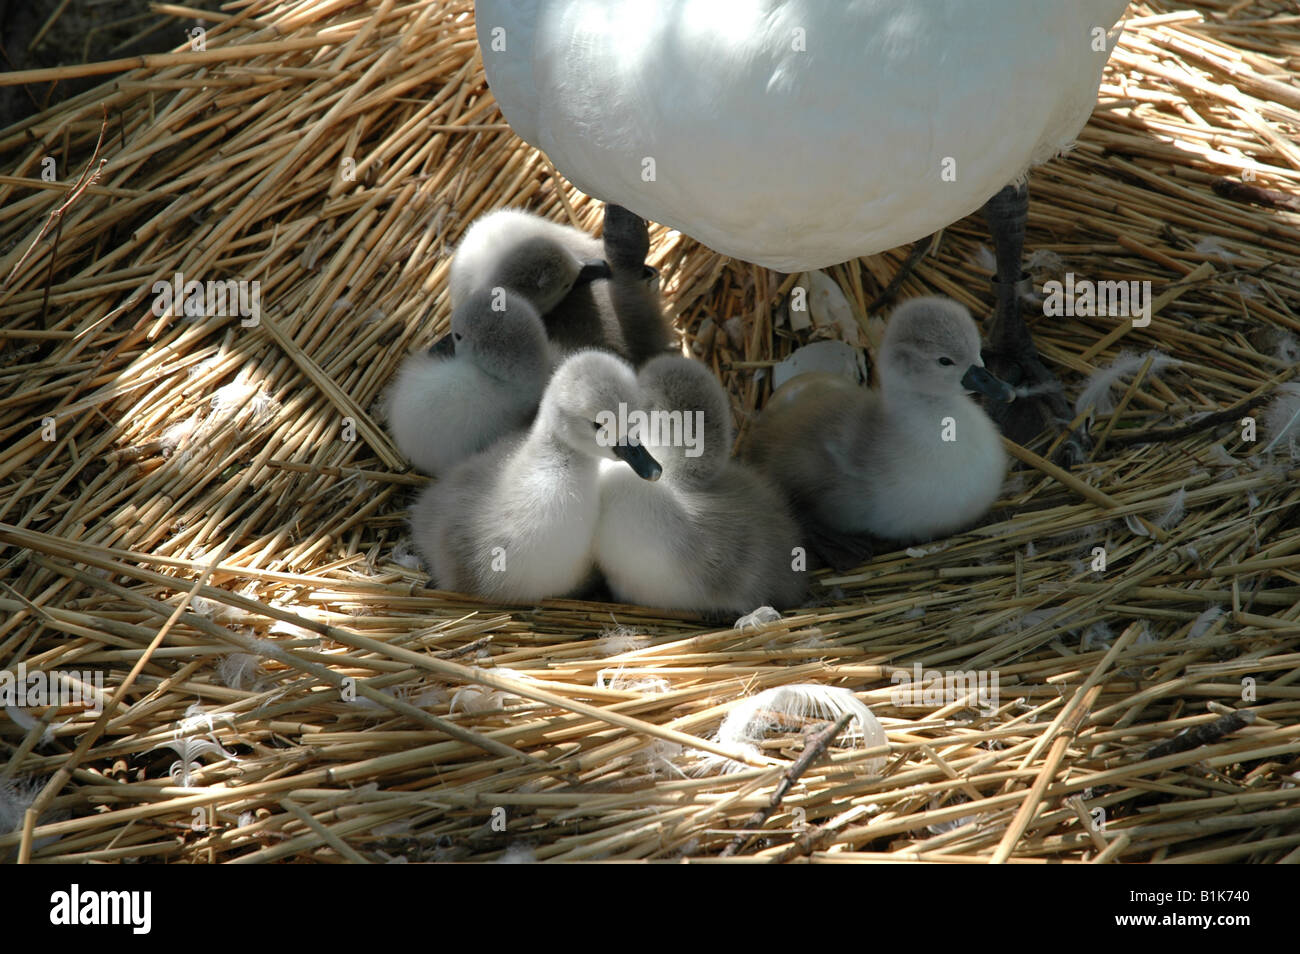 Baby swans nestling under mother Stock Photo